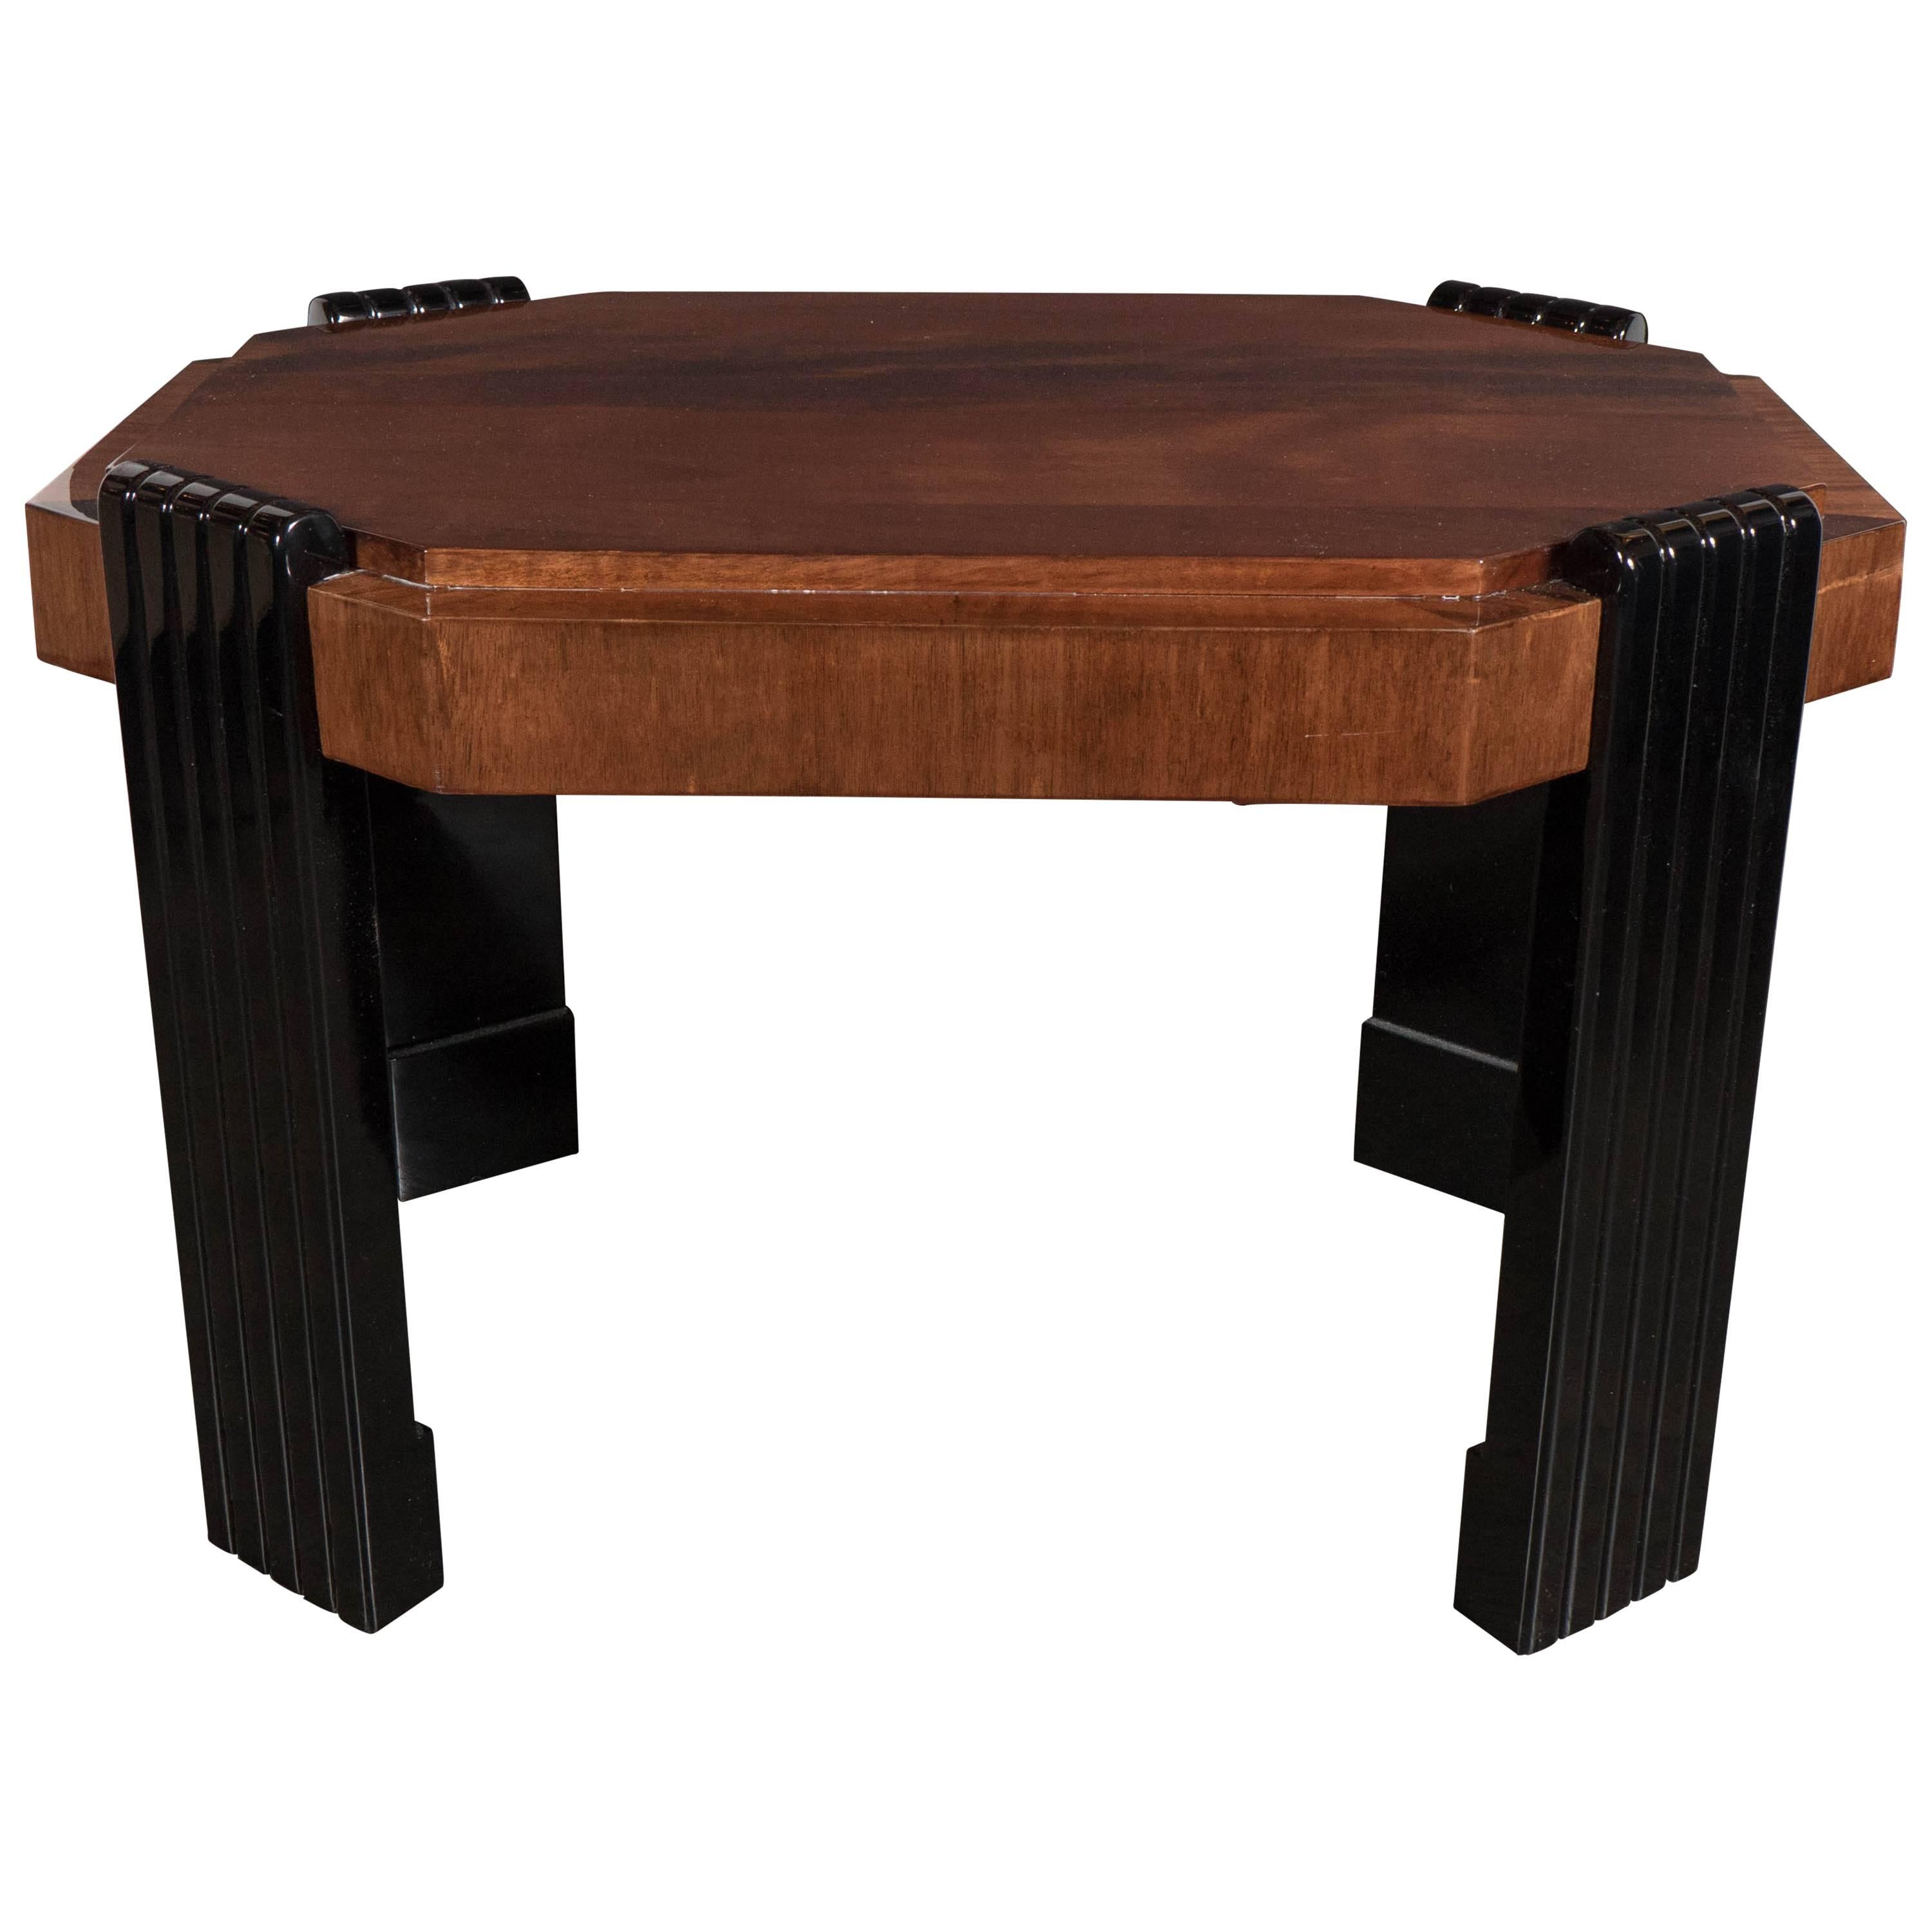 Art Deco Streamlined Octagonal Occasional Table in Bookmatched Burled Walnut